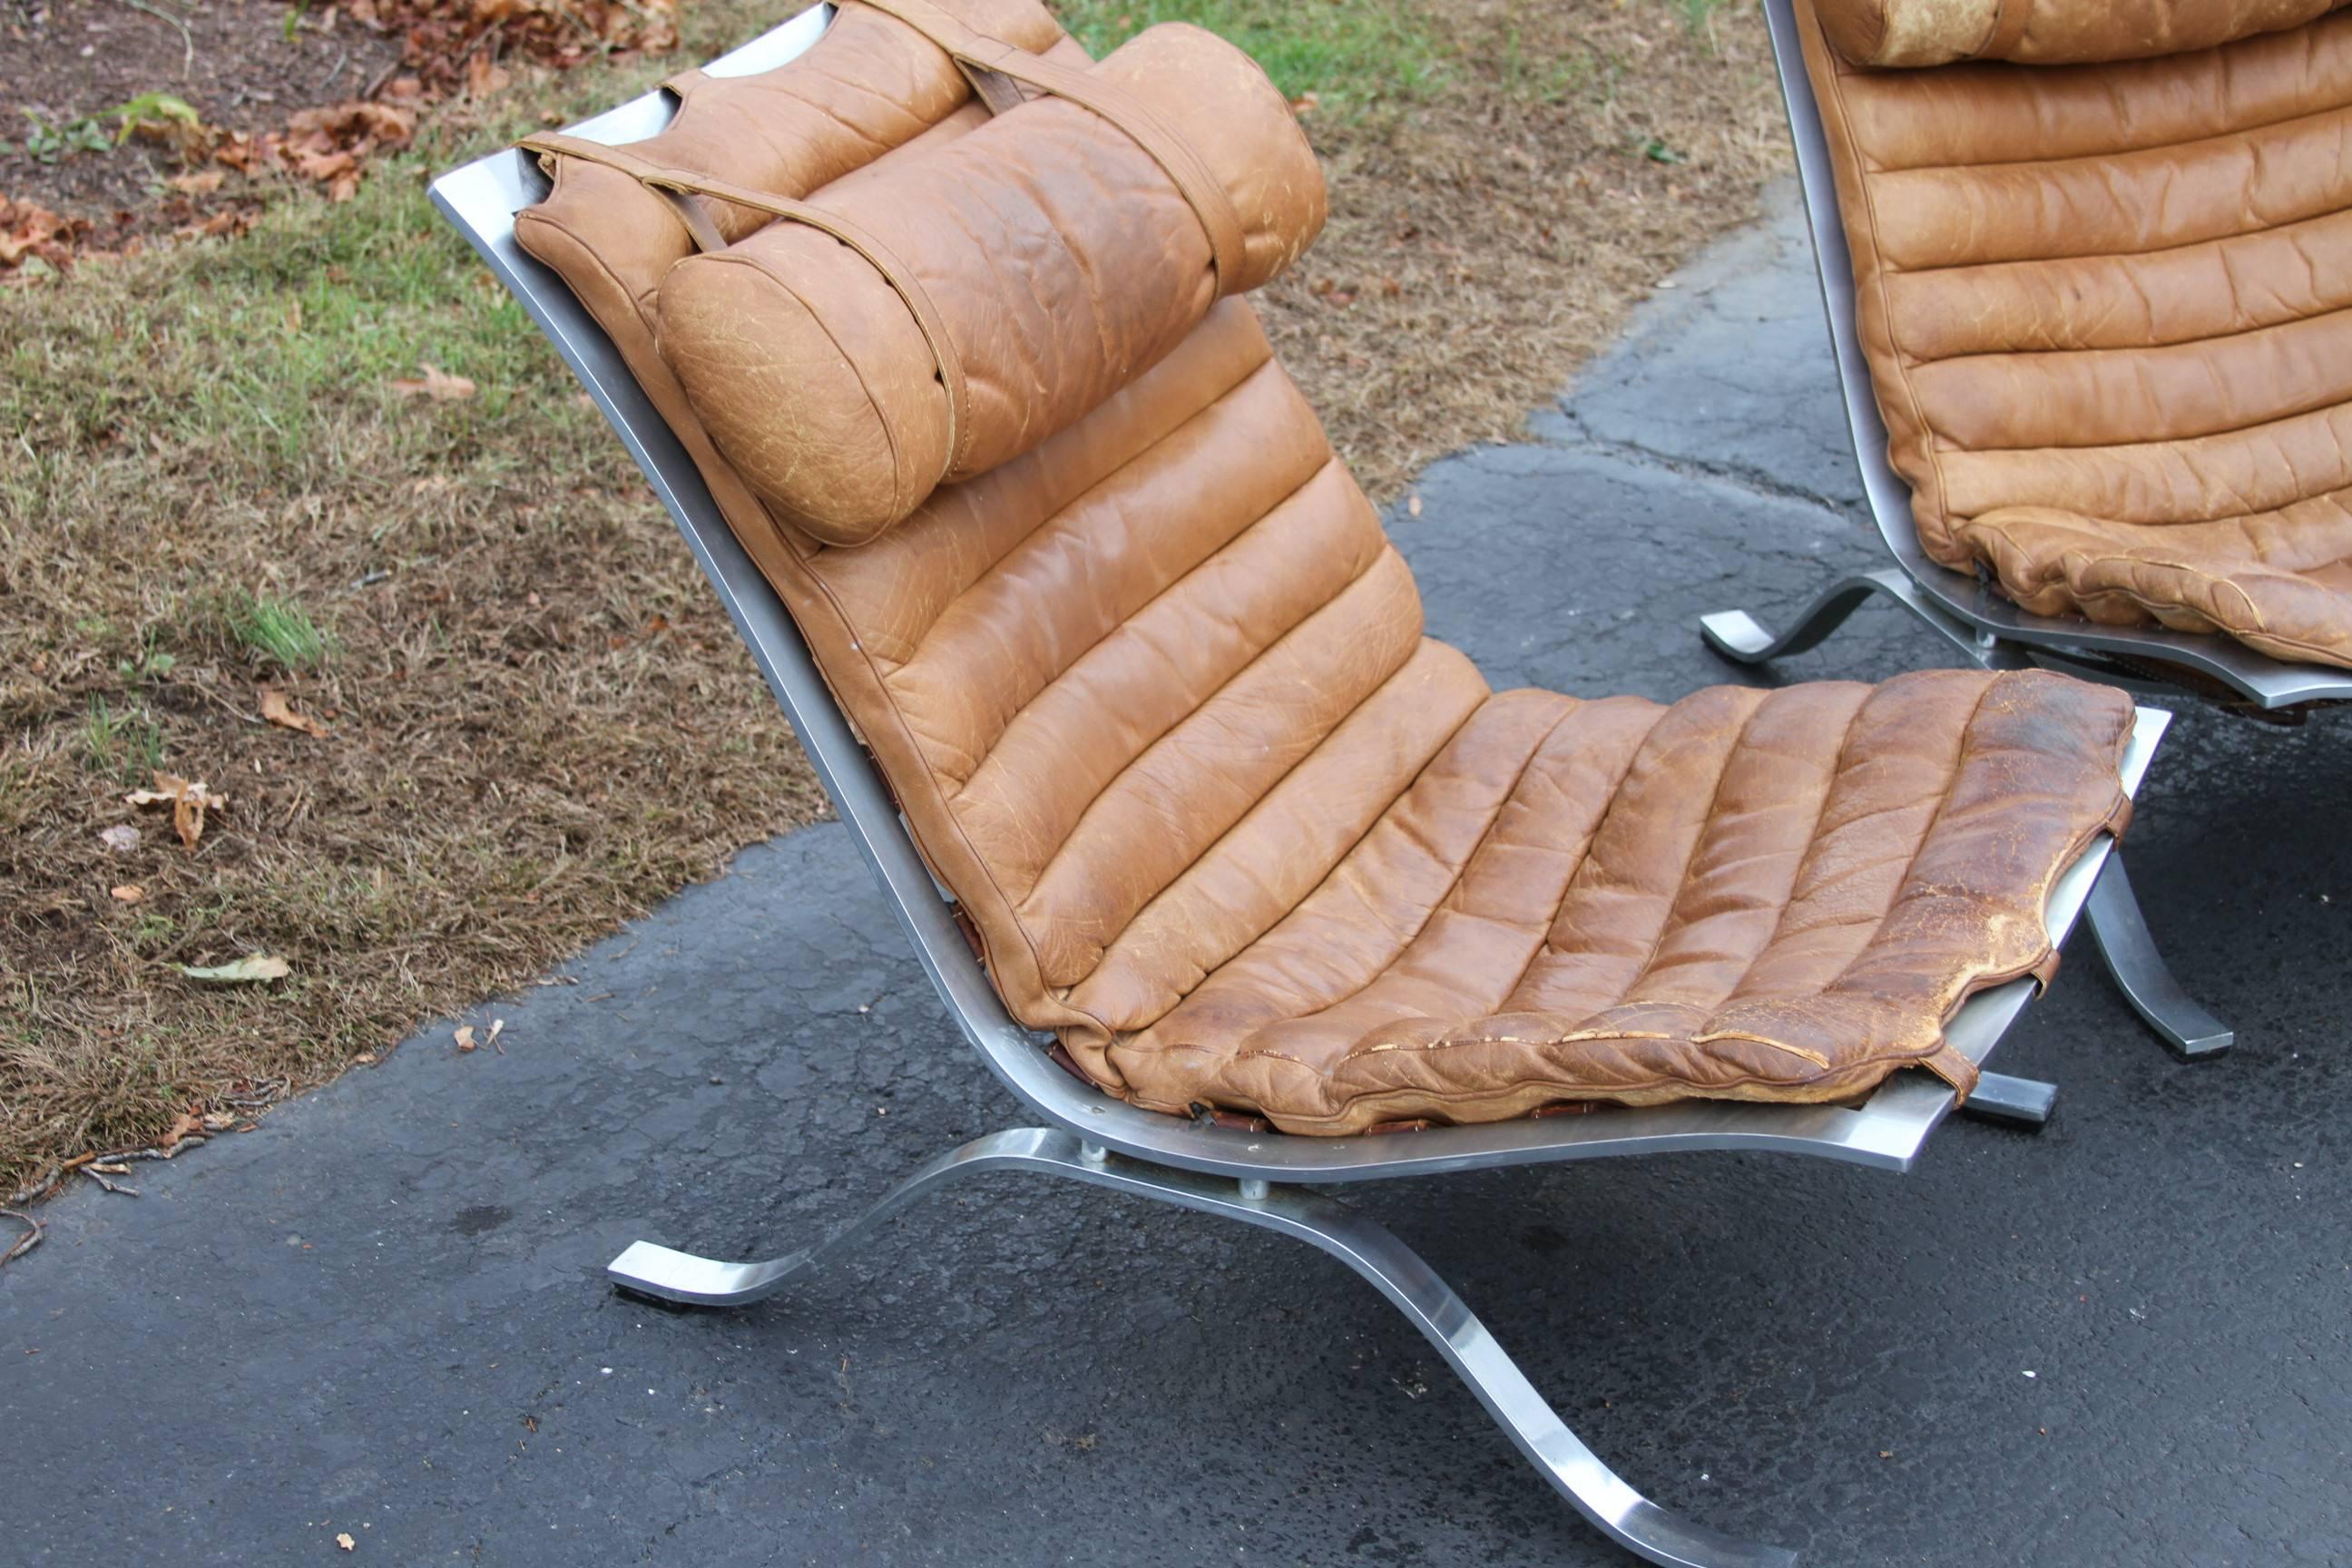 Spectacular pair of Ari easy chairs designed by Arne Norell in 1966 and manufactured by his company in Aneby, Sweden. As comfortable and sturdy as they are comfortable, the original brown leather is very worn and soft, with some slight staining. An